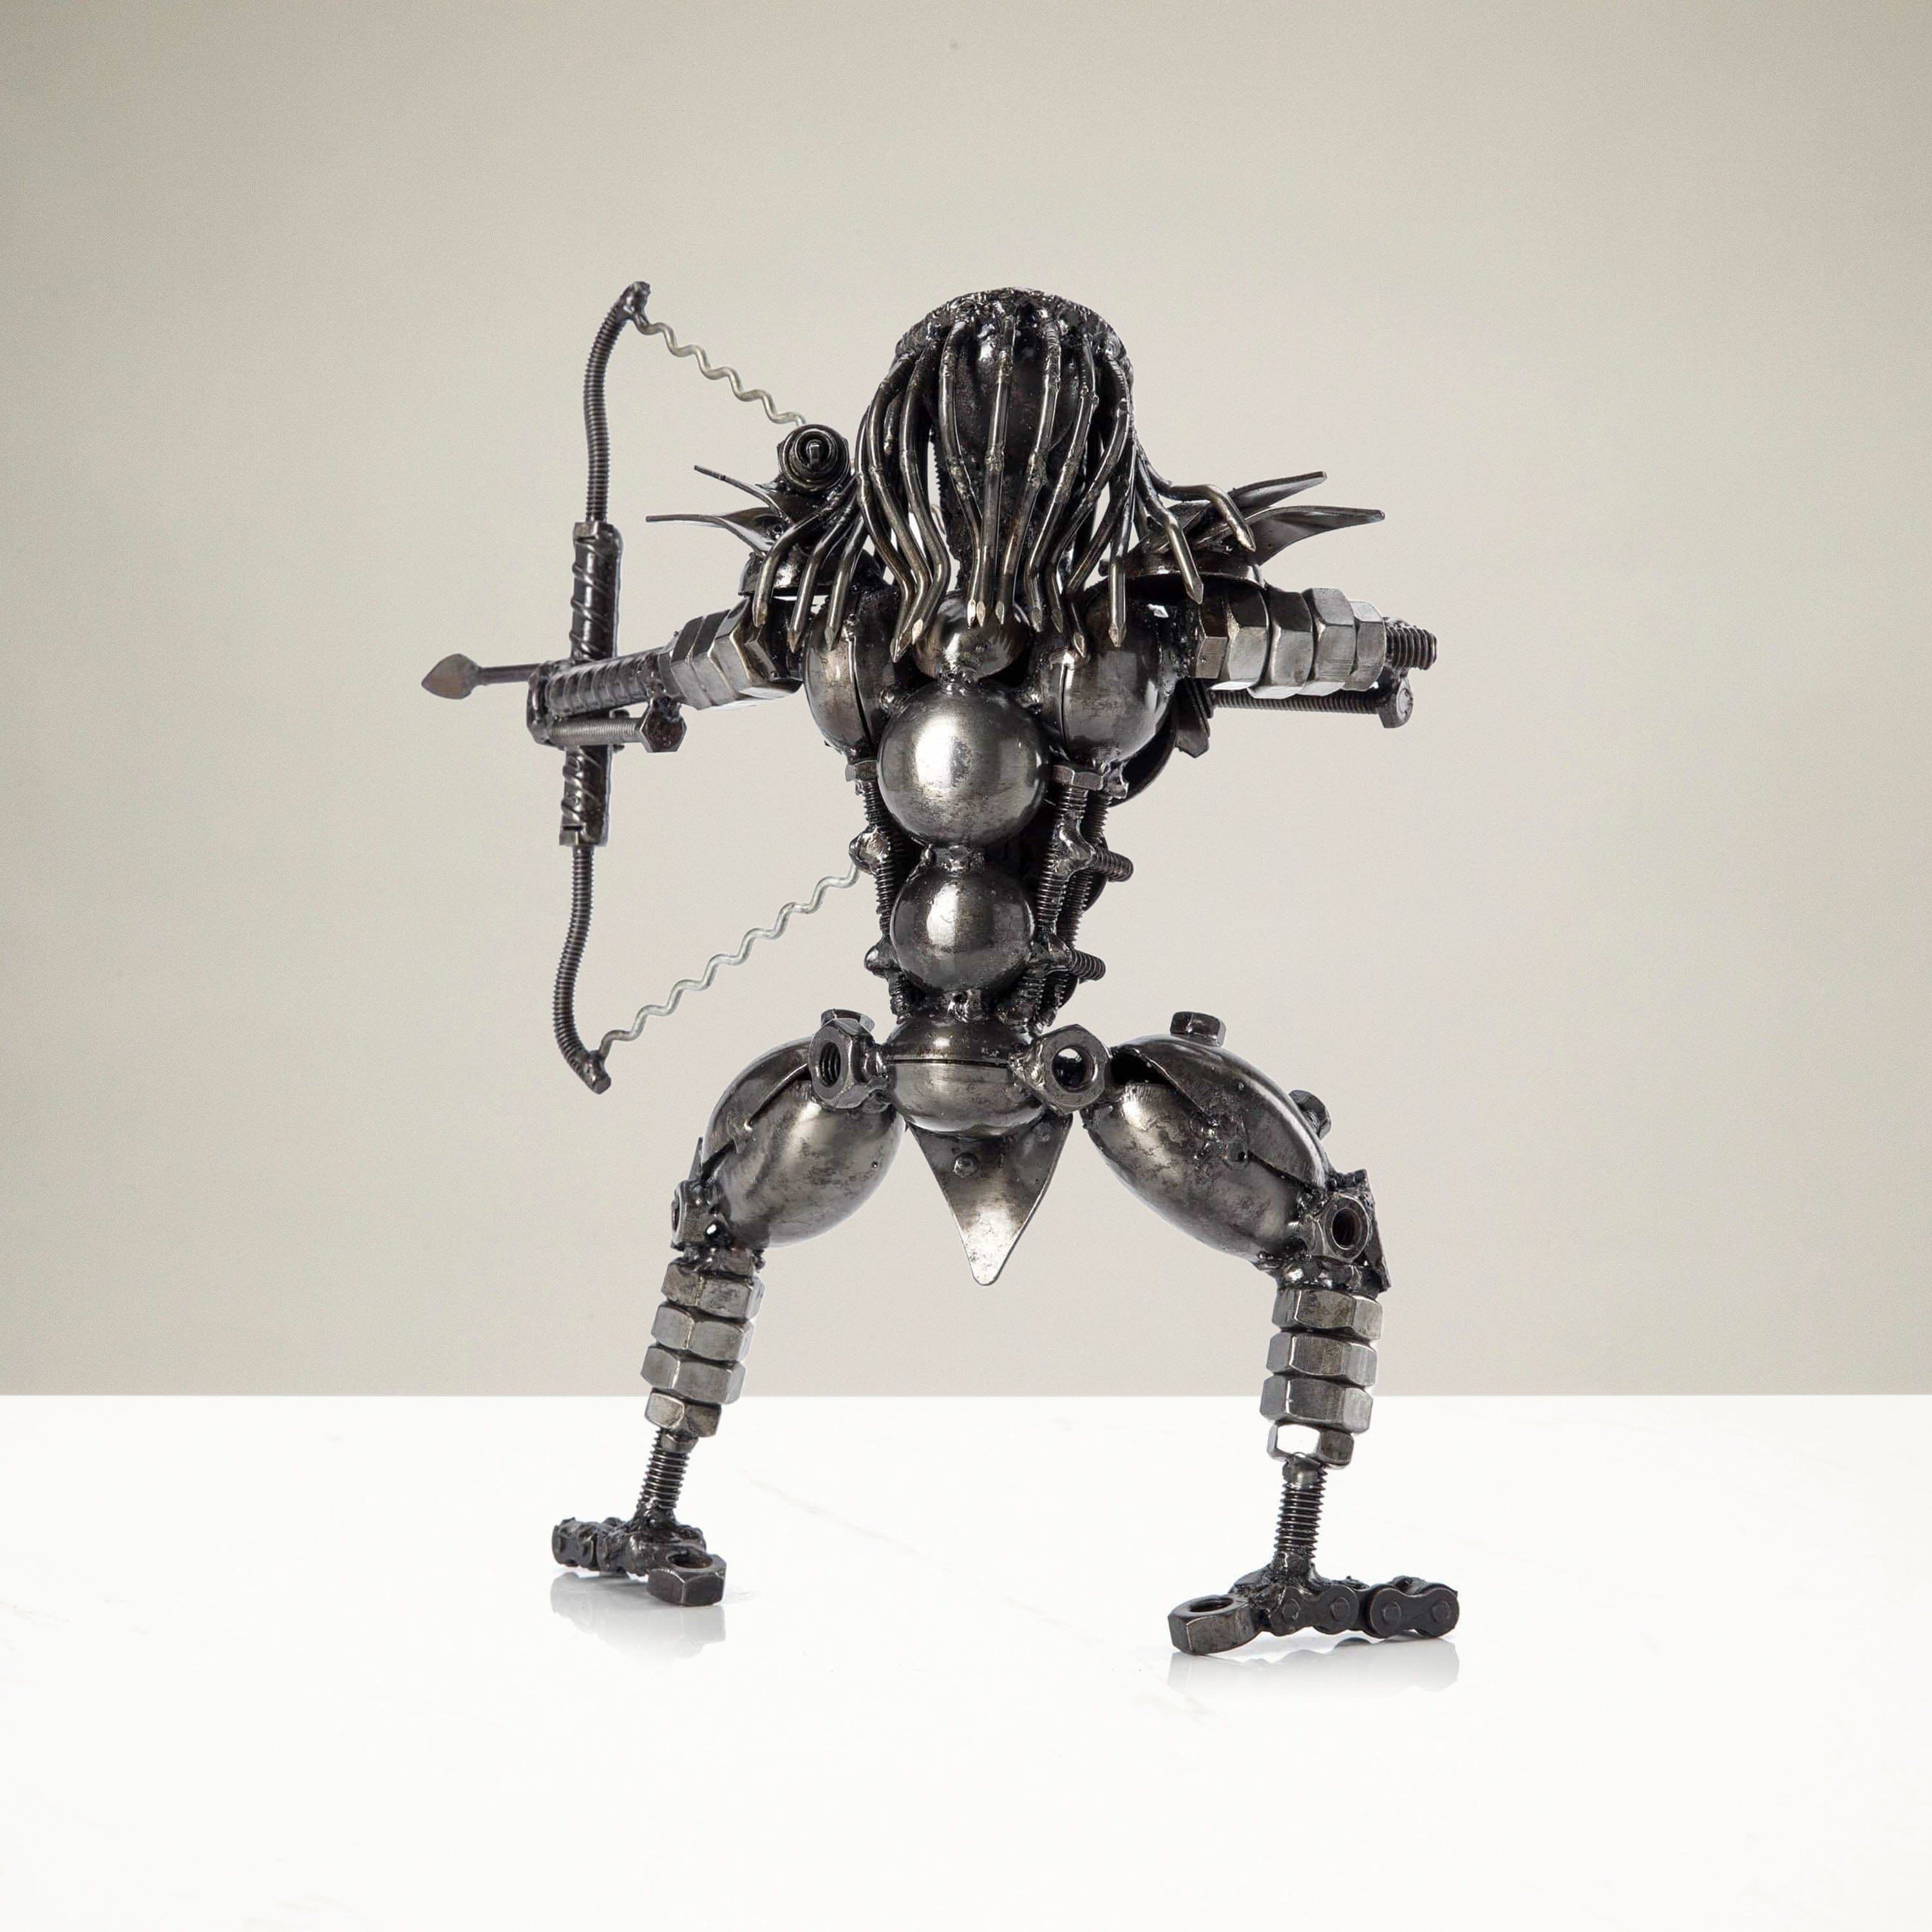 KALIFANO Recycled Metal Art Predator with Bow and Arrow Inspired Recycled Metal Sculpture RMS-700PA-N